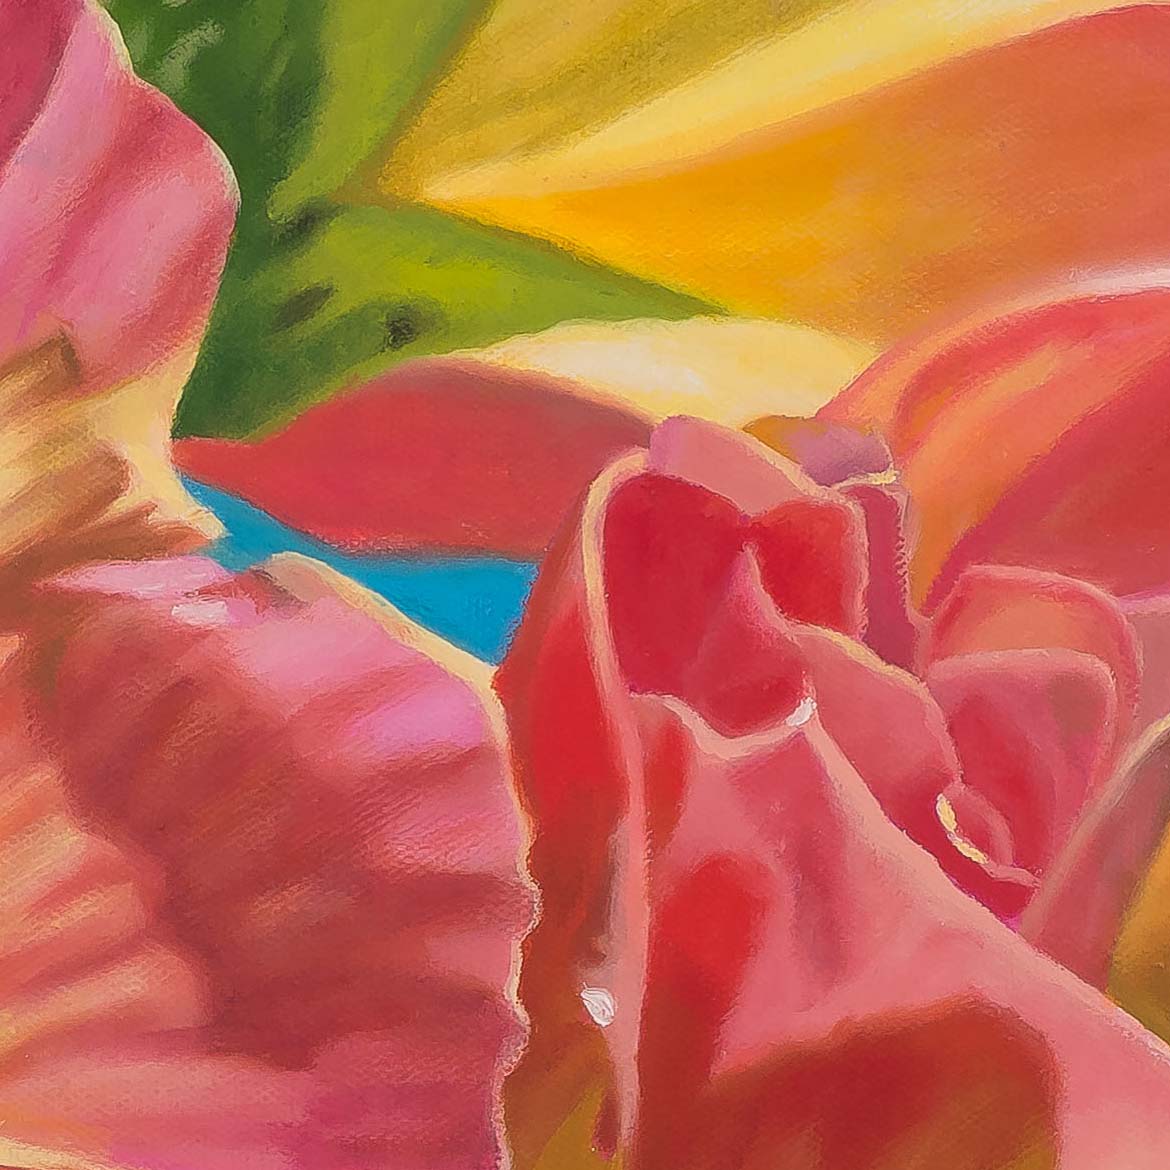 Hollyhock-painting by-Dyan Padgett-detail-210209